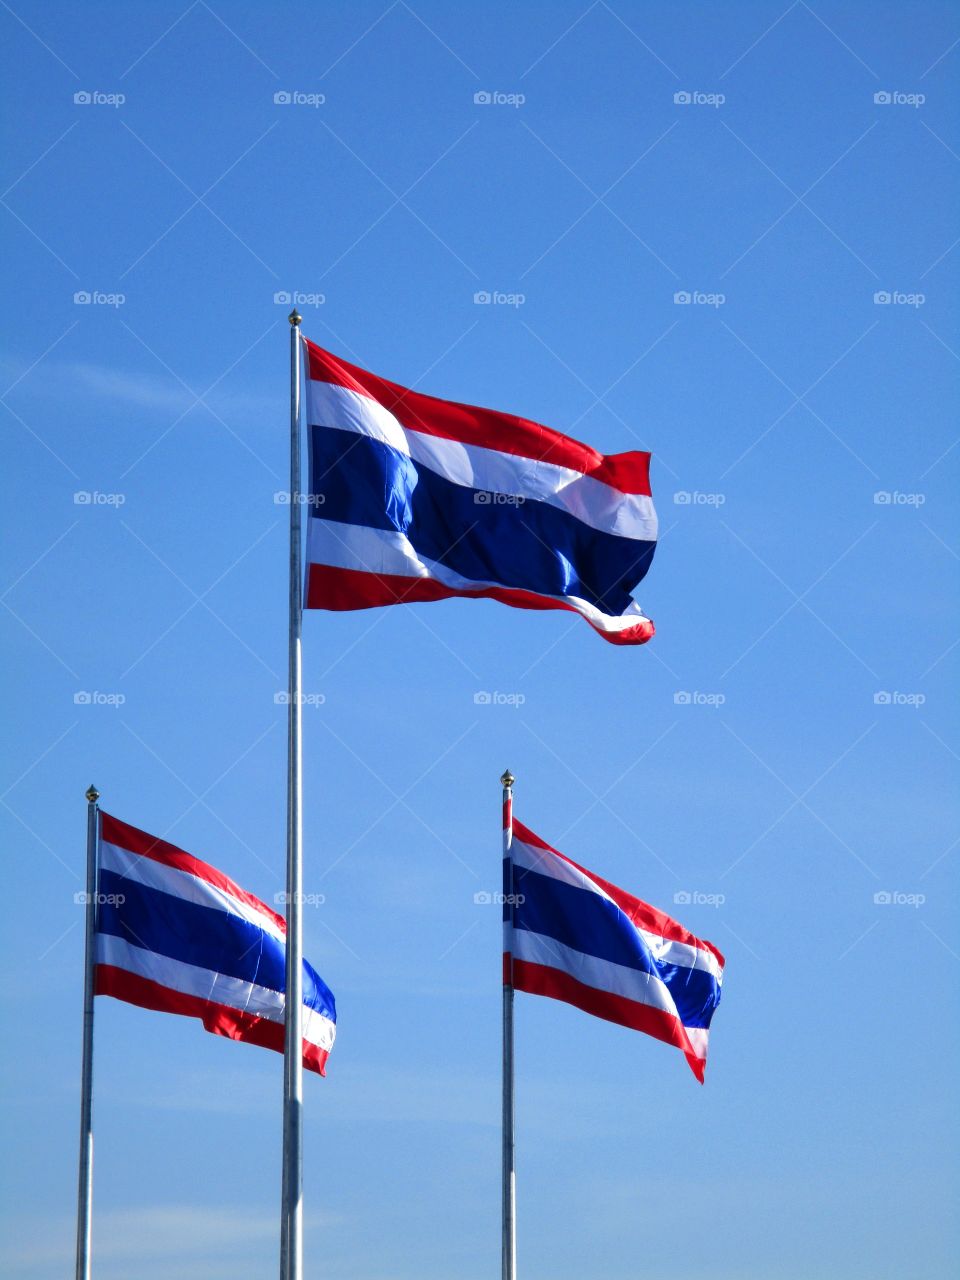 Show us your favourite flags